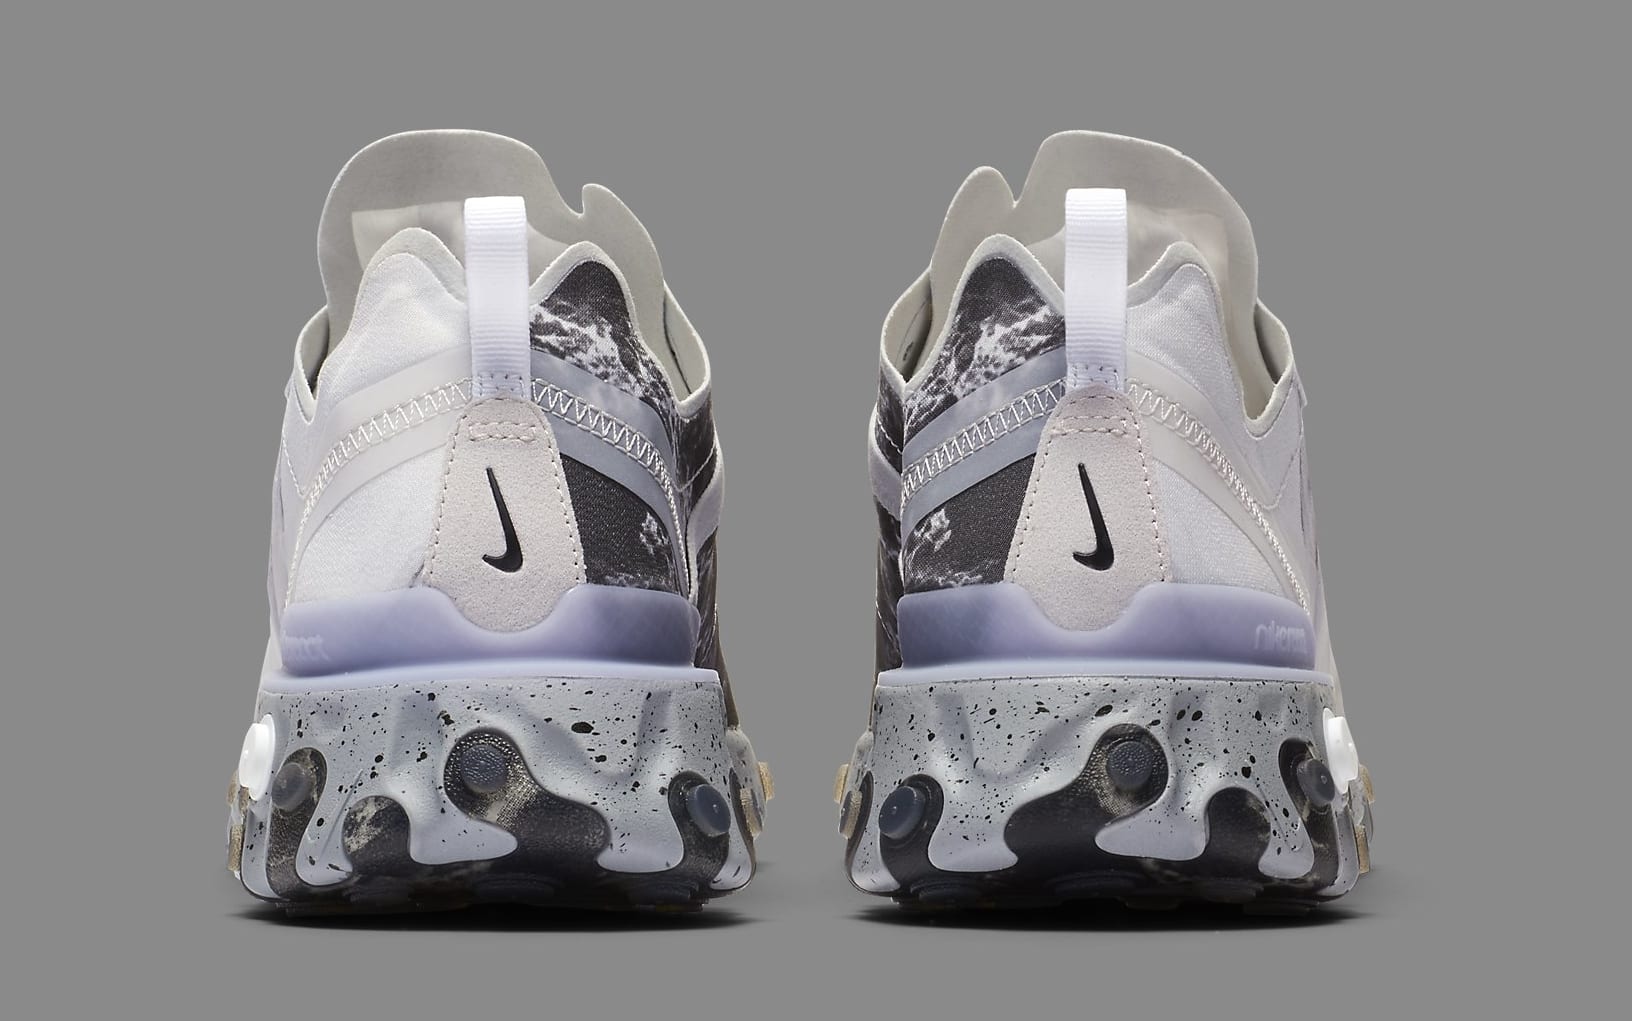 nike react element 55 release date